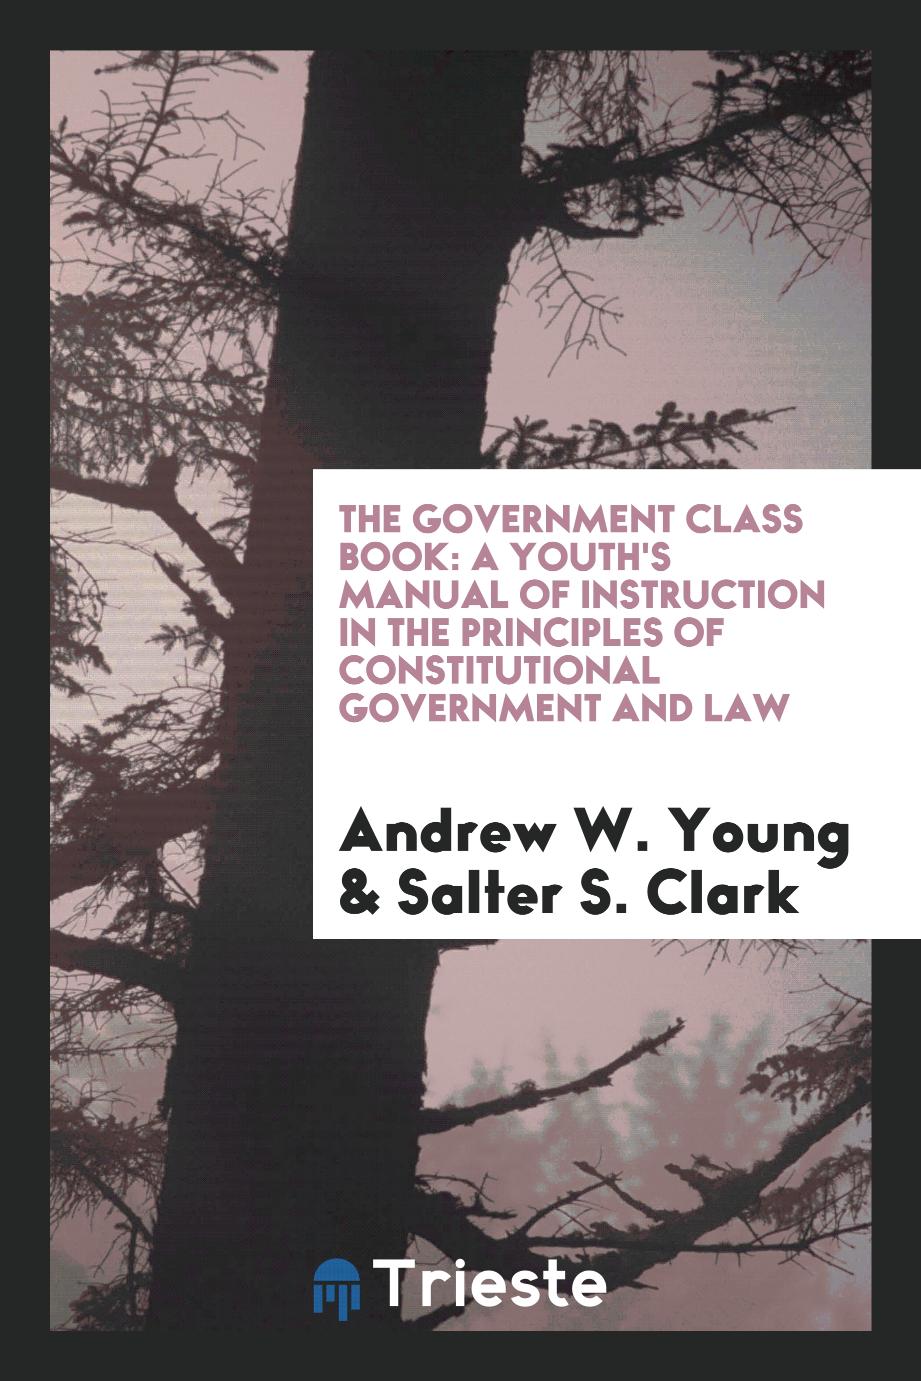 The government class book: a youth's manual of instruction in the principles of constitutional government and law